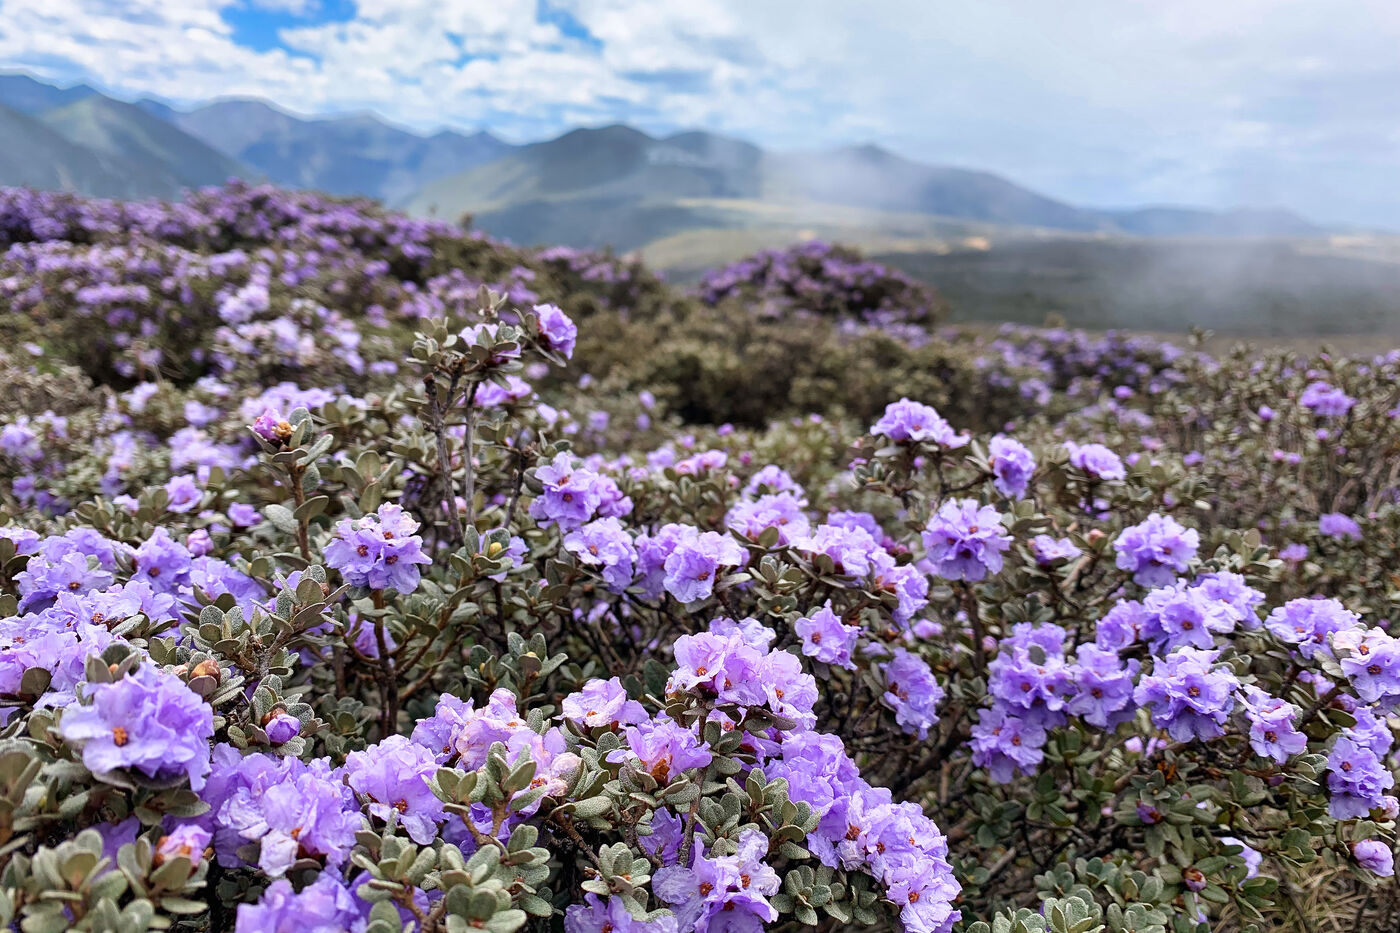 Pale purple flowering shrubs in the foreground, with foggy hills leading to mountains in the background.